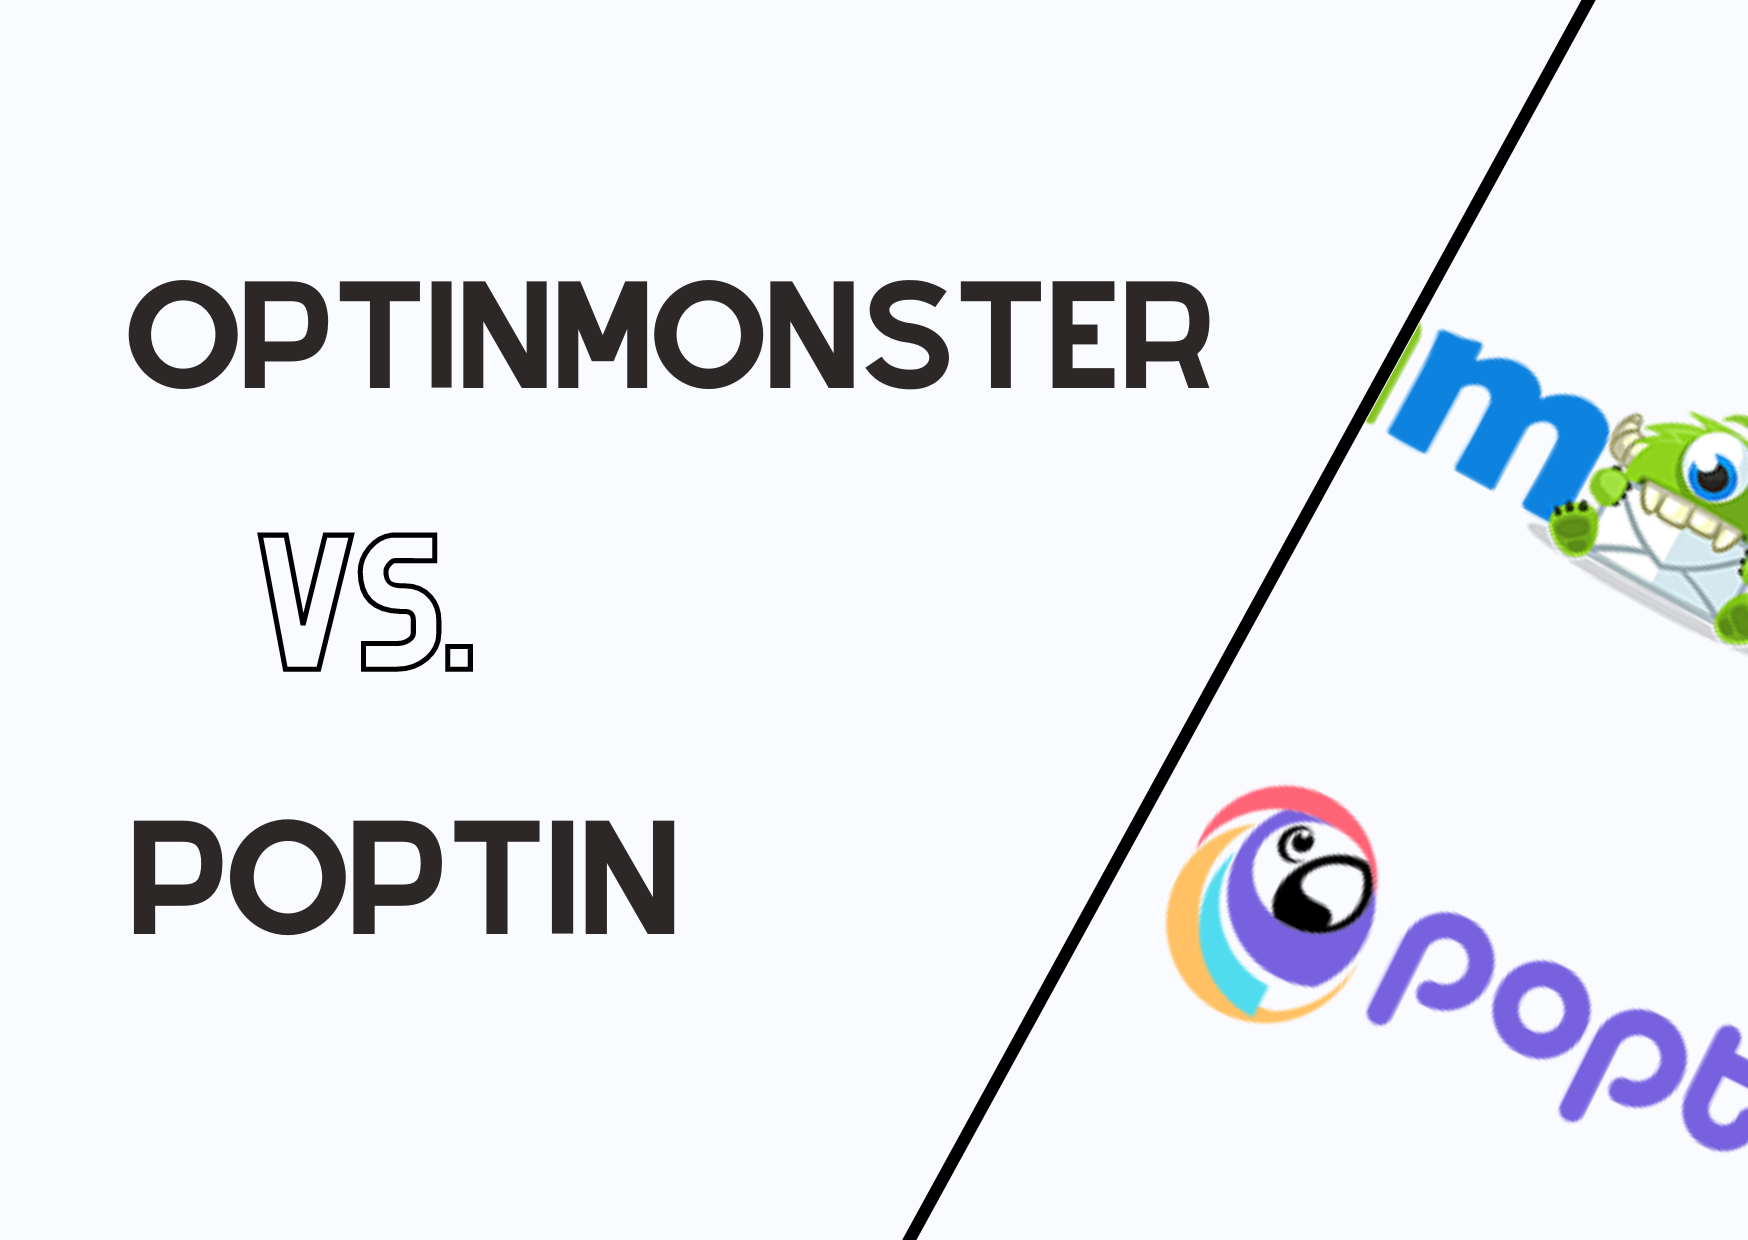 the banner of OptinMonster and Poptin comparison with the logos